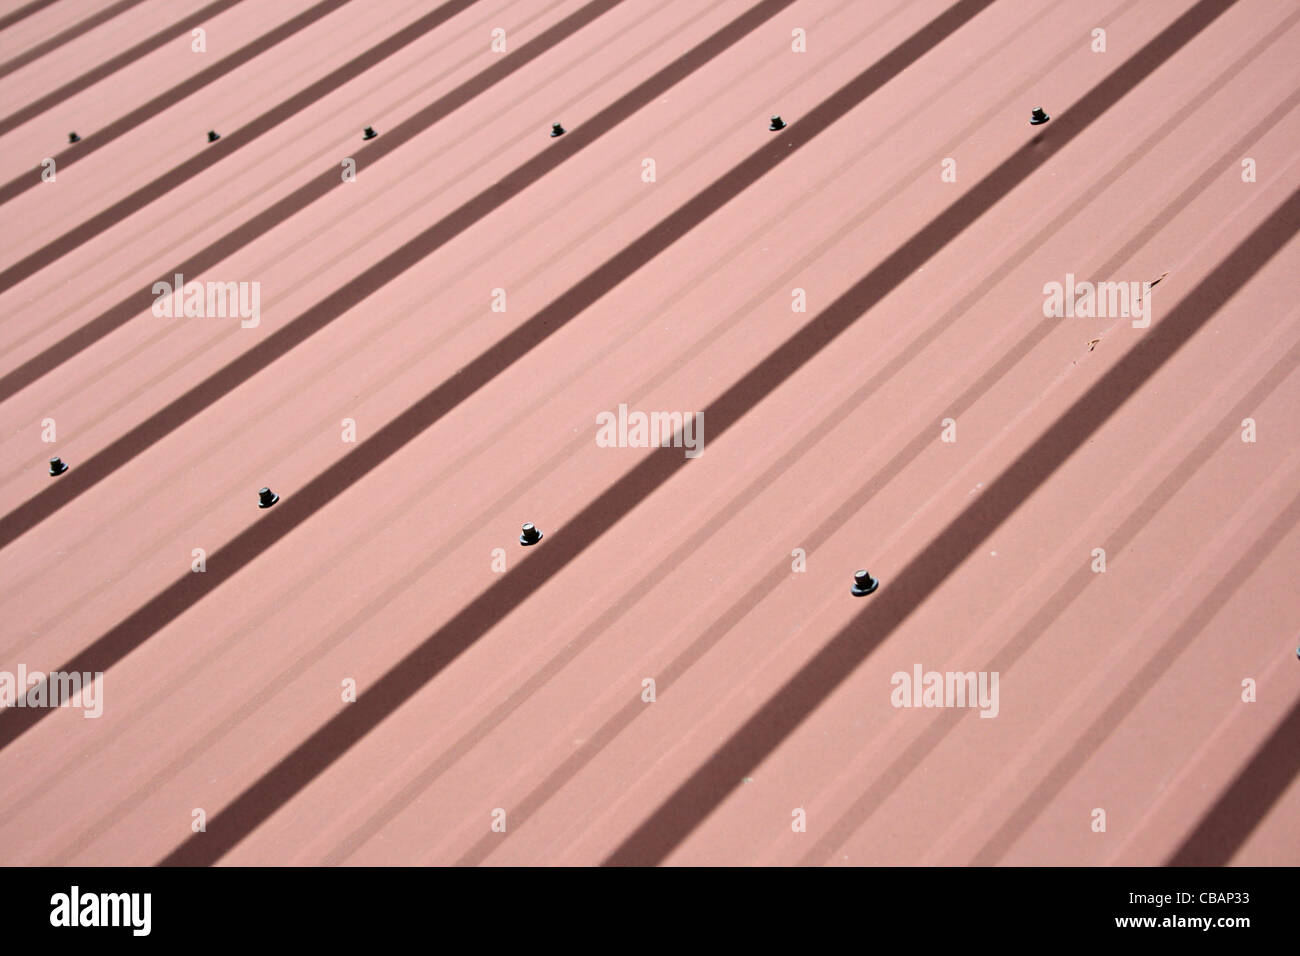 red metal roof background with diagonal panels Stock Photo